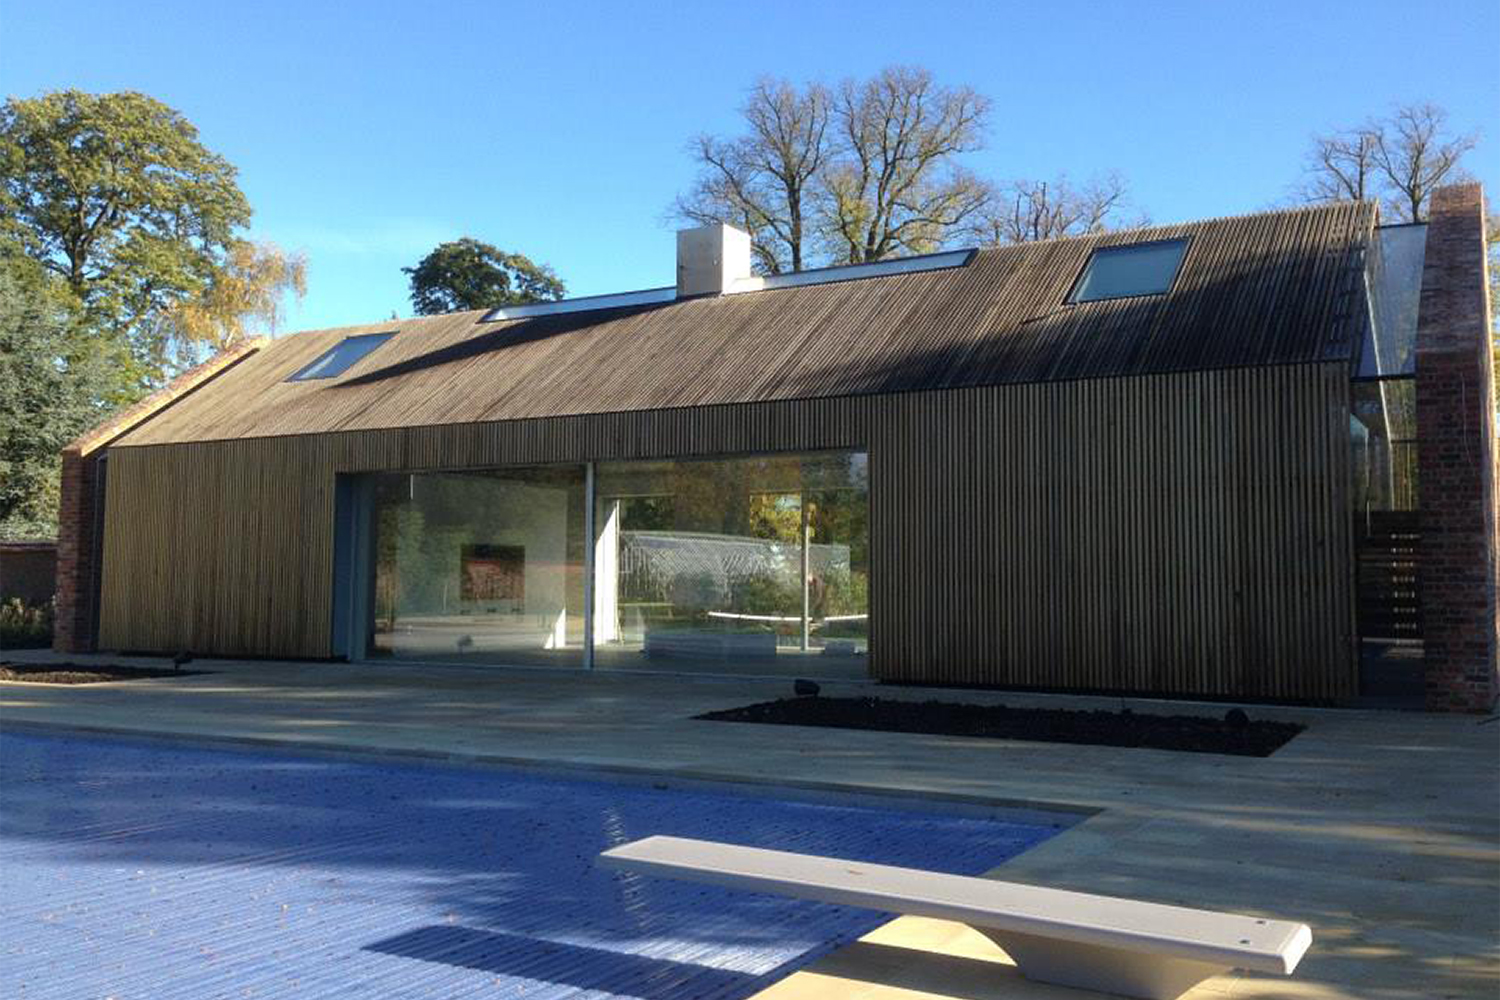 Pool House | Oxfordshire